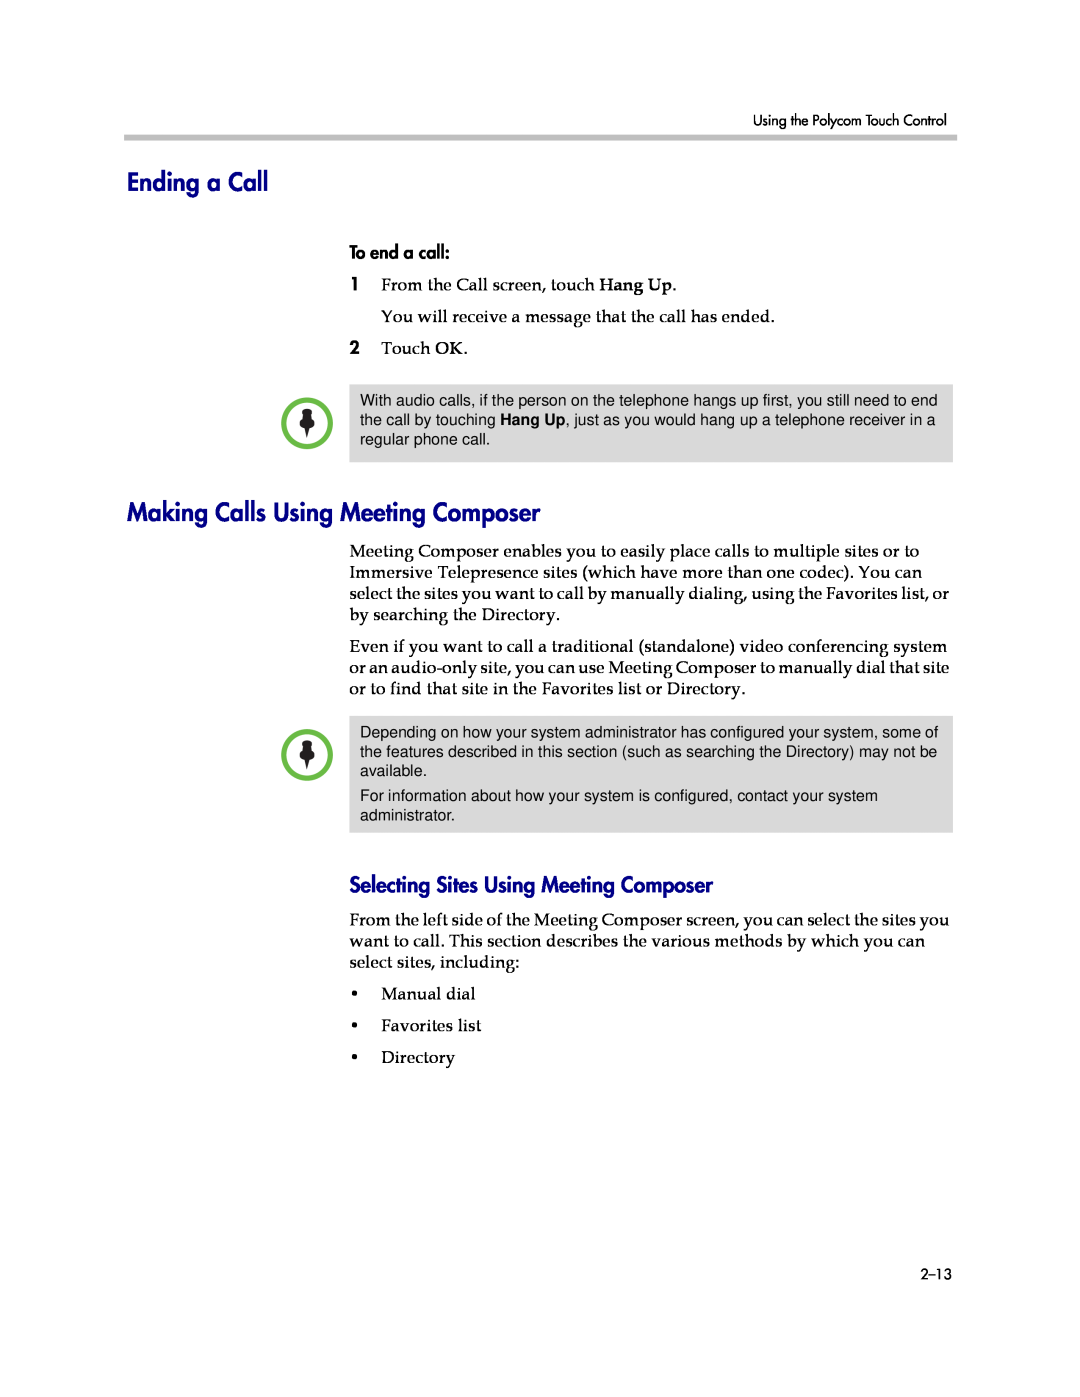 Polycom 3725-63211-002, A manual Ending a Call, Making Calls Using Meeting Composer, Selecting Sites Using Meeting Composer 